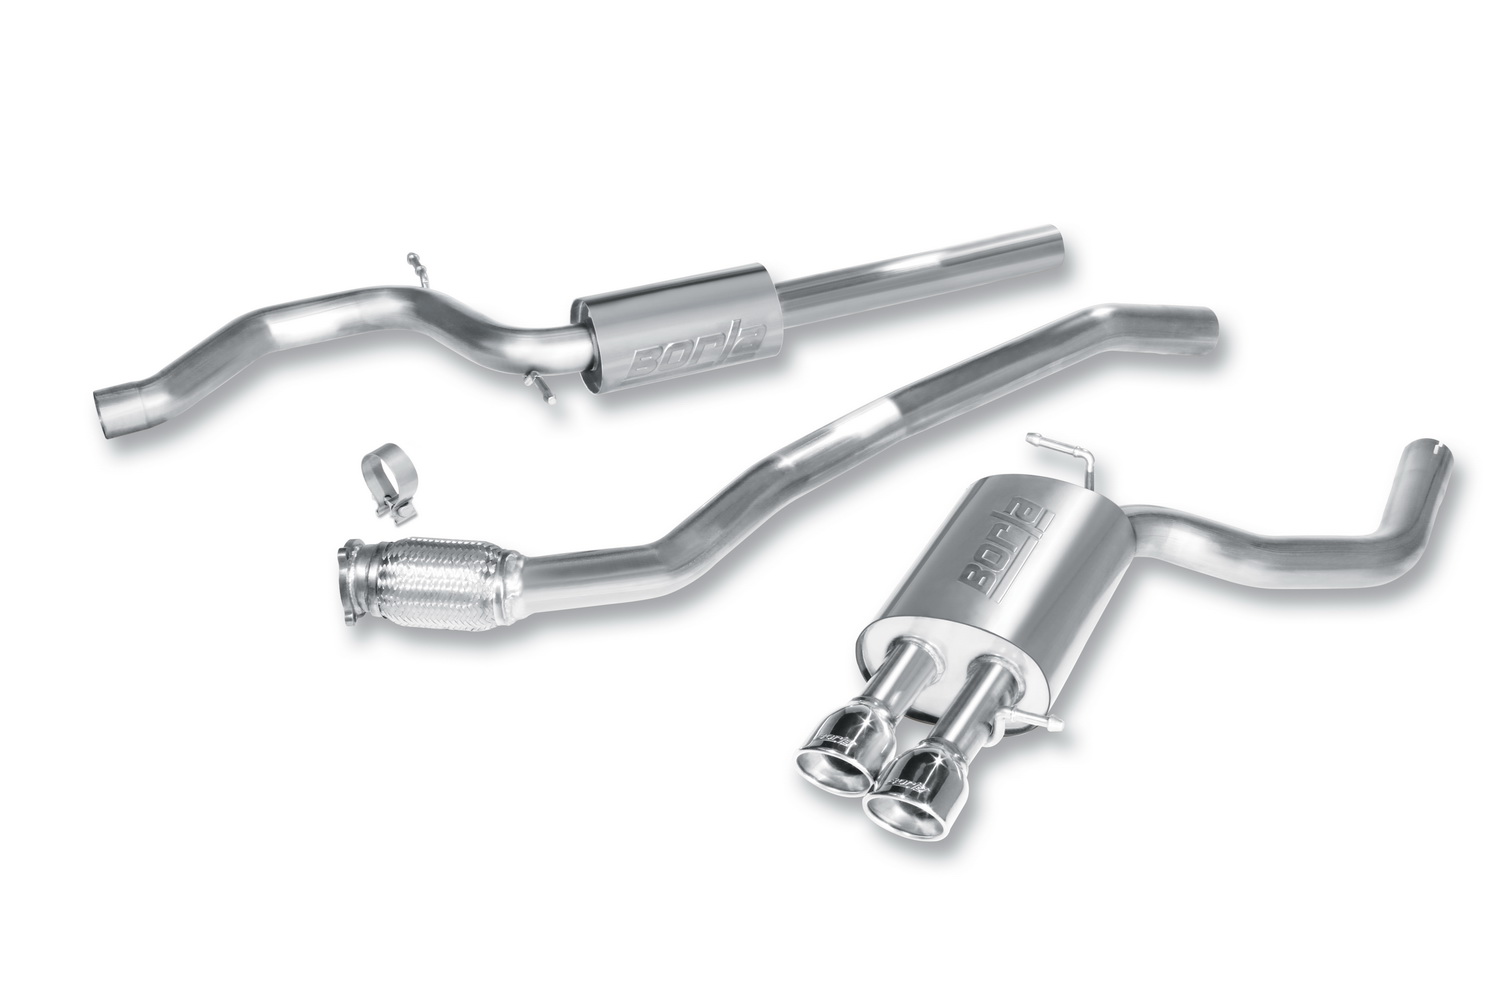 Borla 140315 S-Type Cat-Back Exhaust System Fits 09-16 A4 A4 allroad A4 Quattro